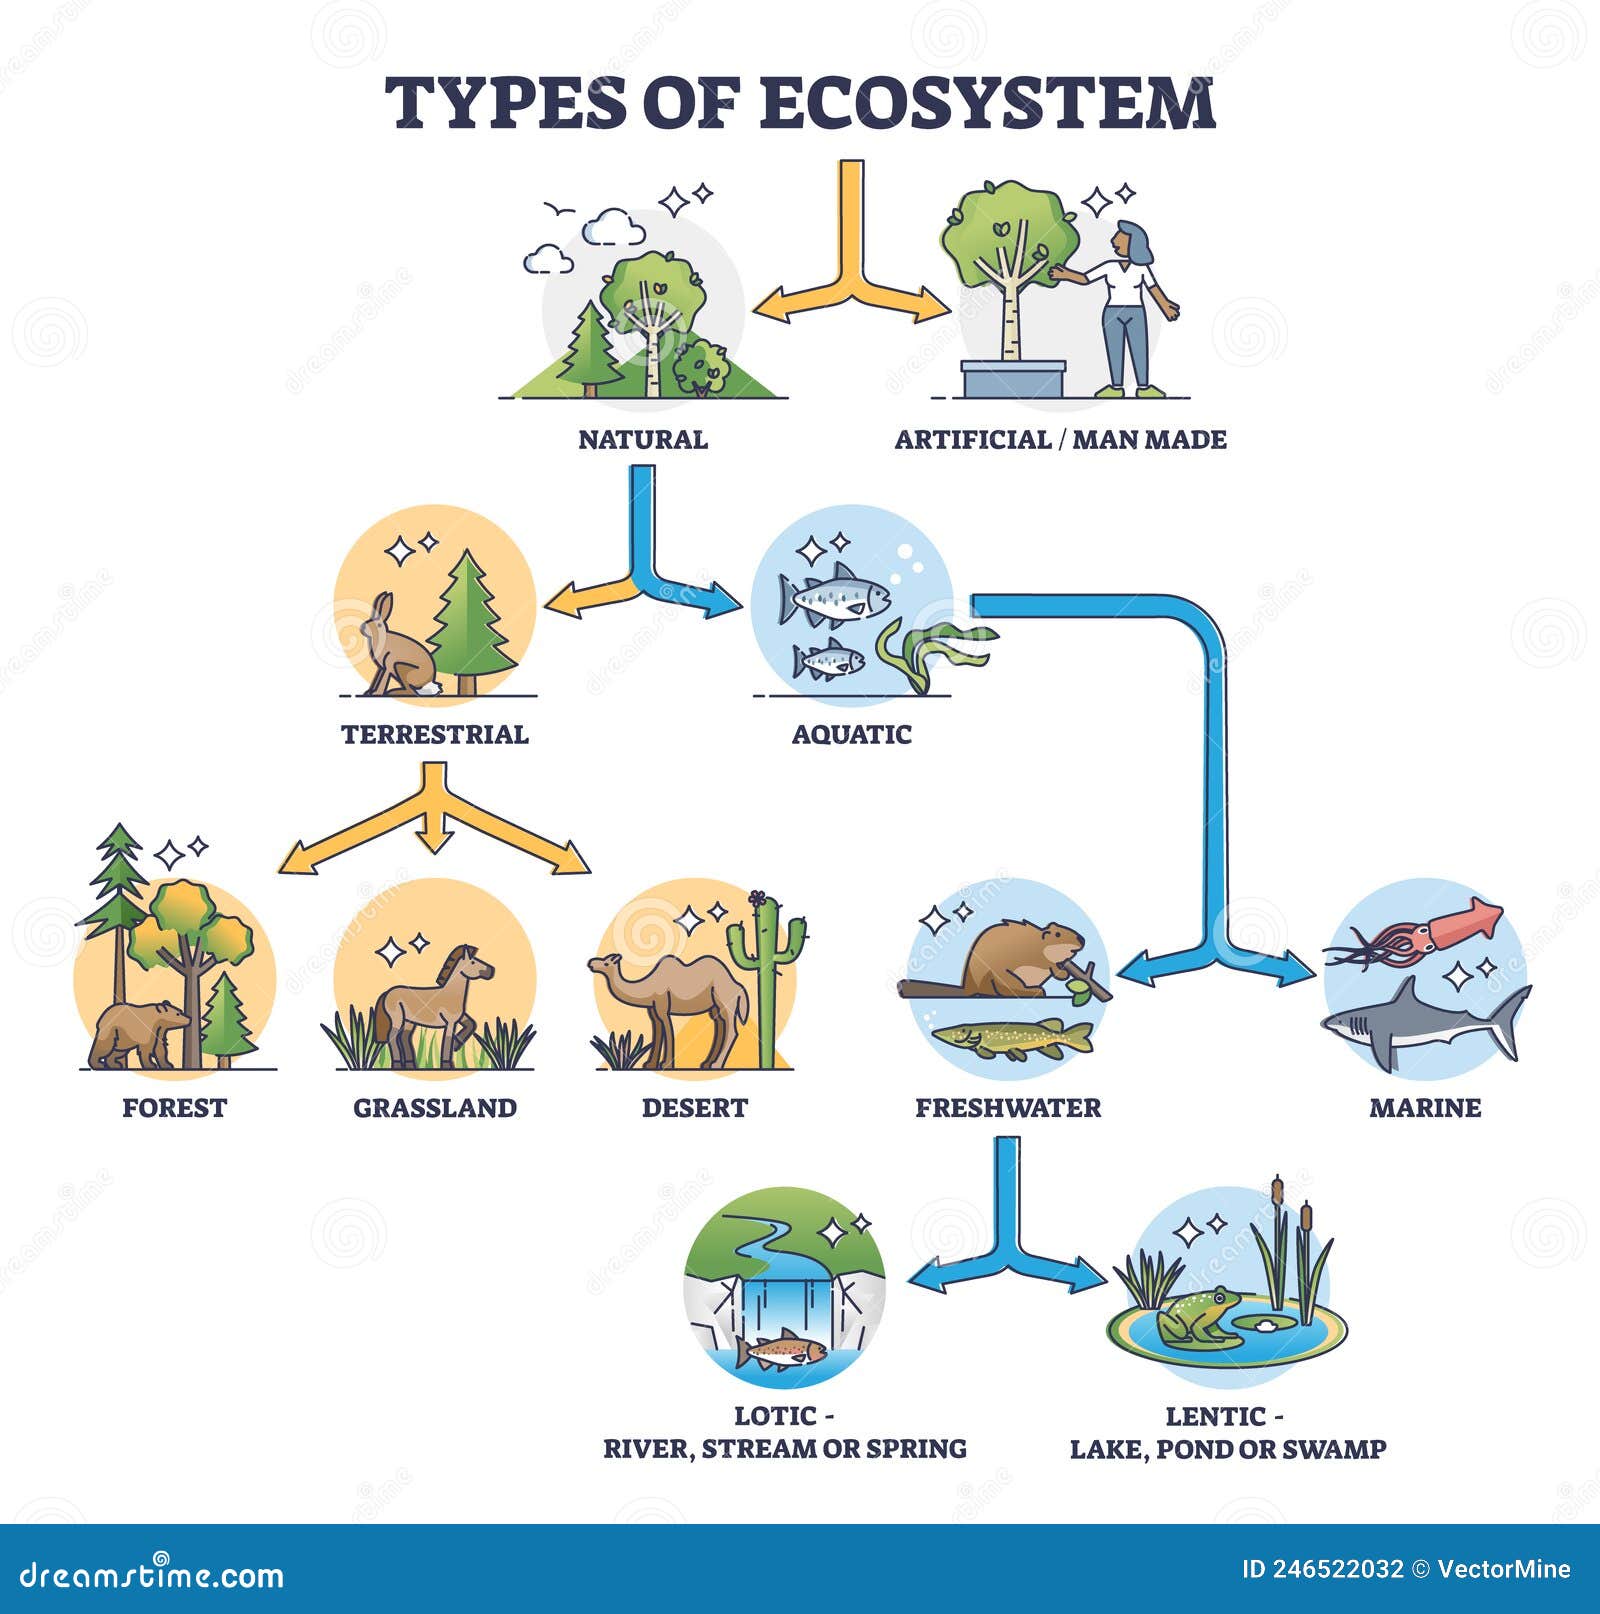 types of ecosystem with natural and artificial division outline diagram